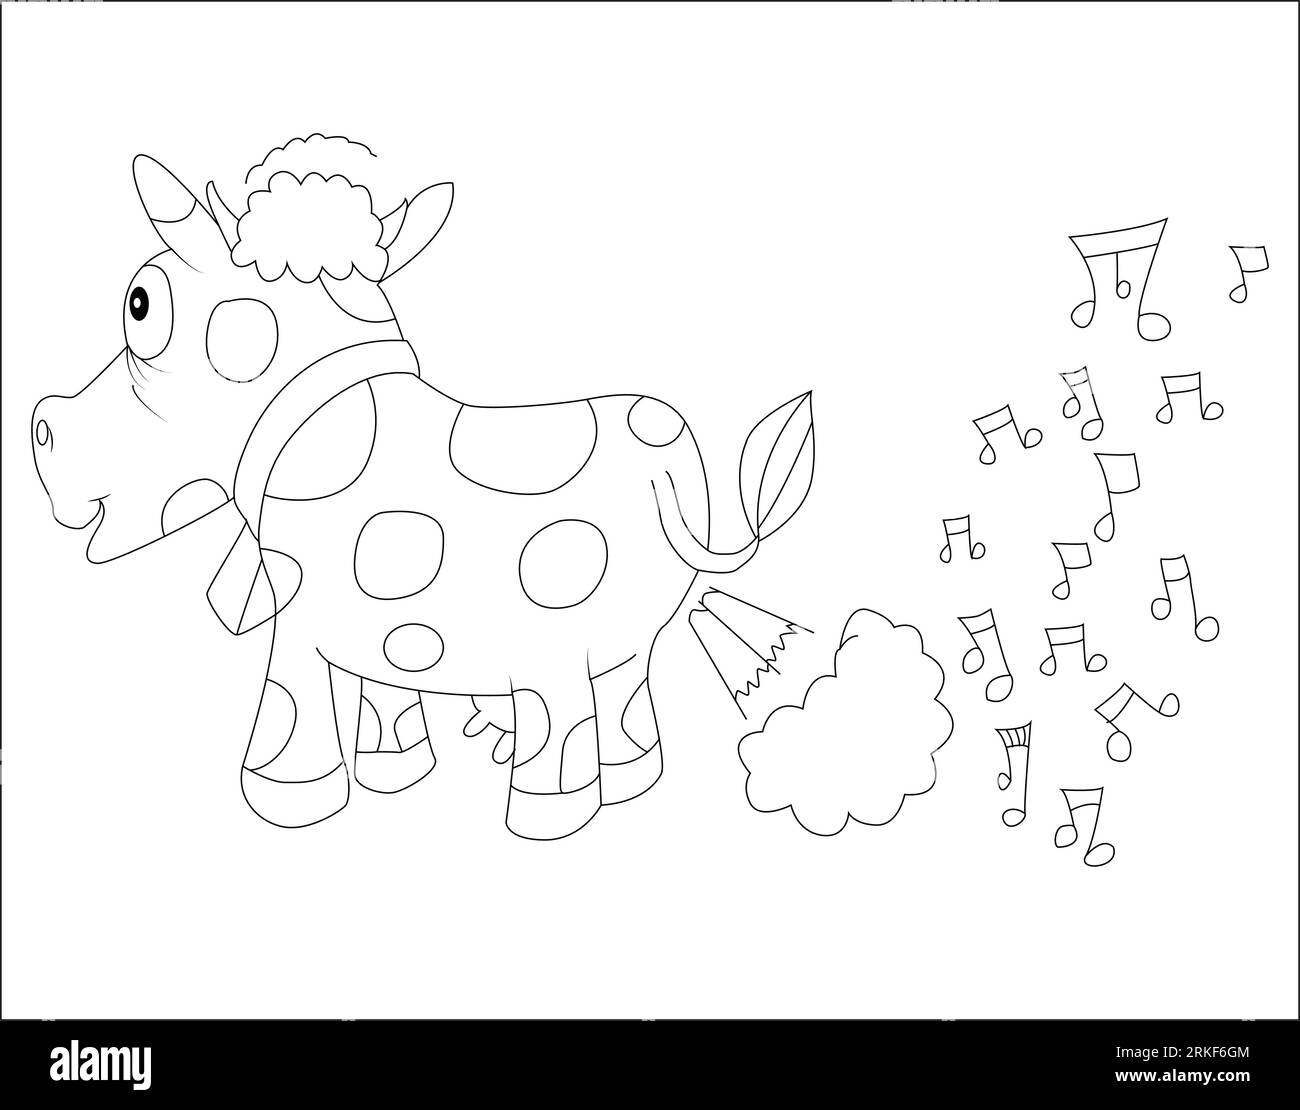 Farting Animals Coloring Page lustig lustiges Malbuch von Tieren (lustige Animal Coloring Book Page) Stock Vektor